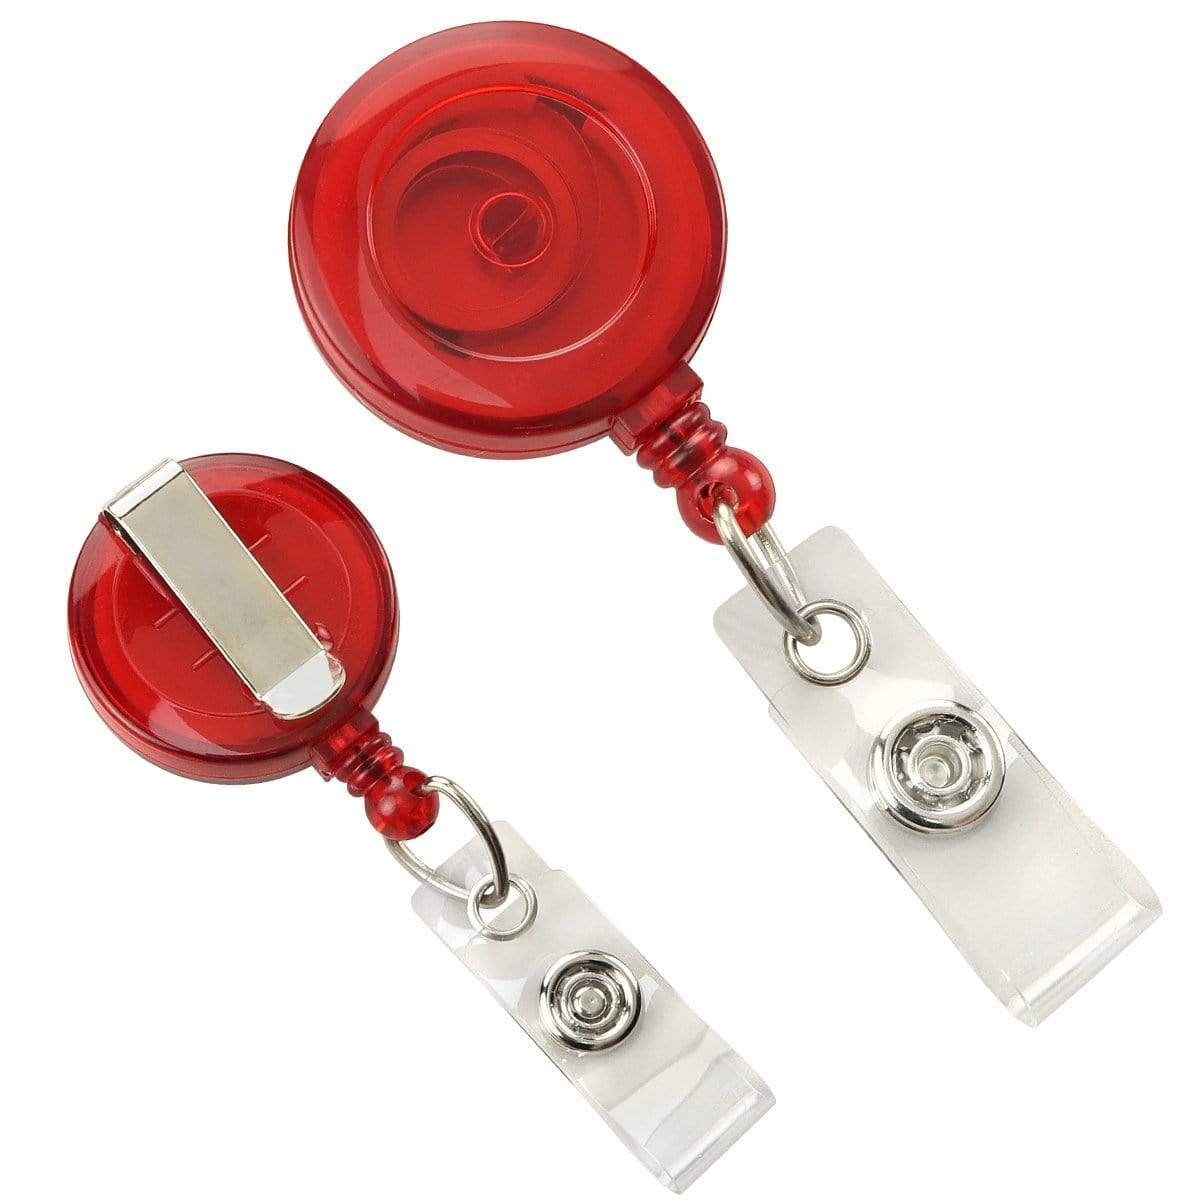 Yueton Chroming Plastic Retractable Belt Clip Badge Reel with